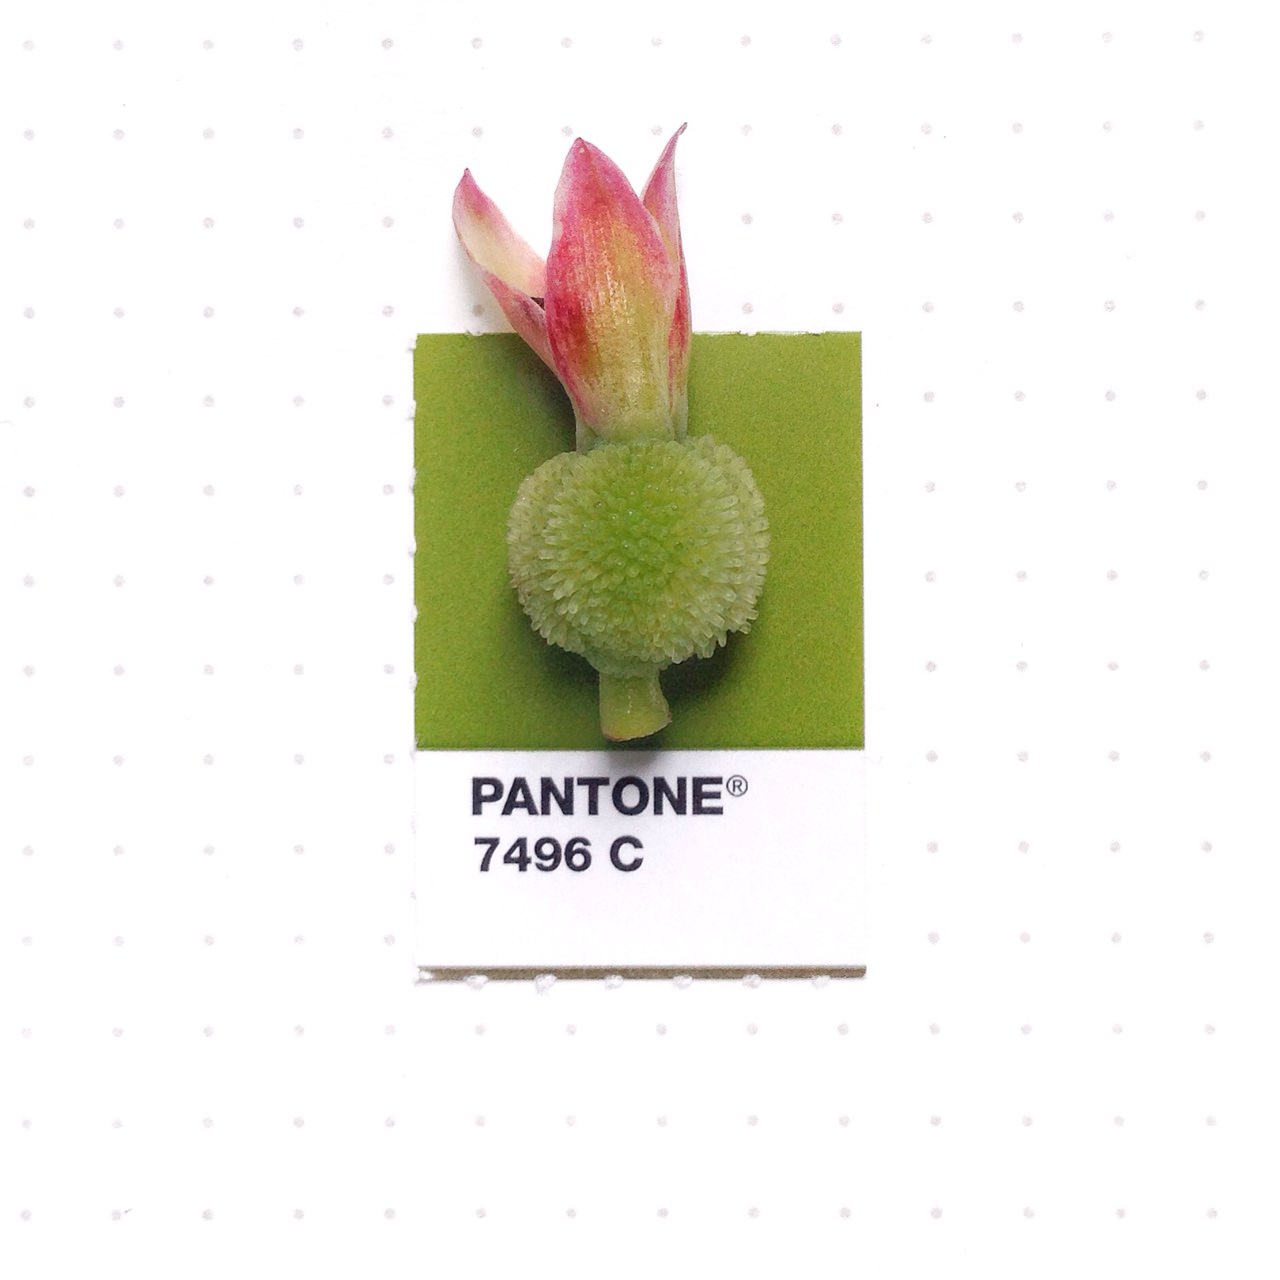 bridging-life-and-design-in-15-pantone-color-matches-10